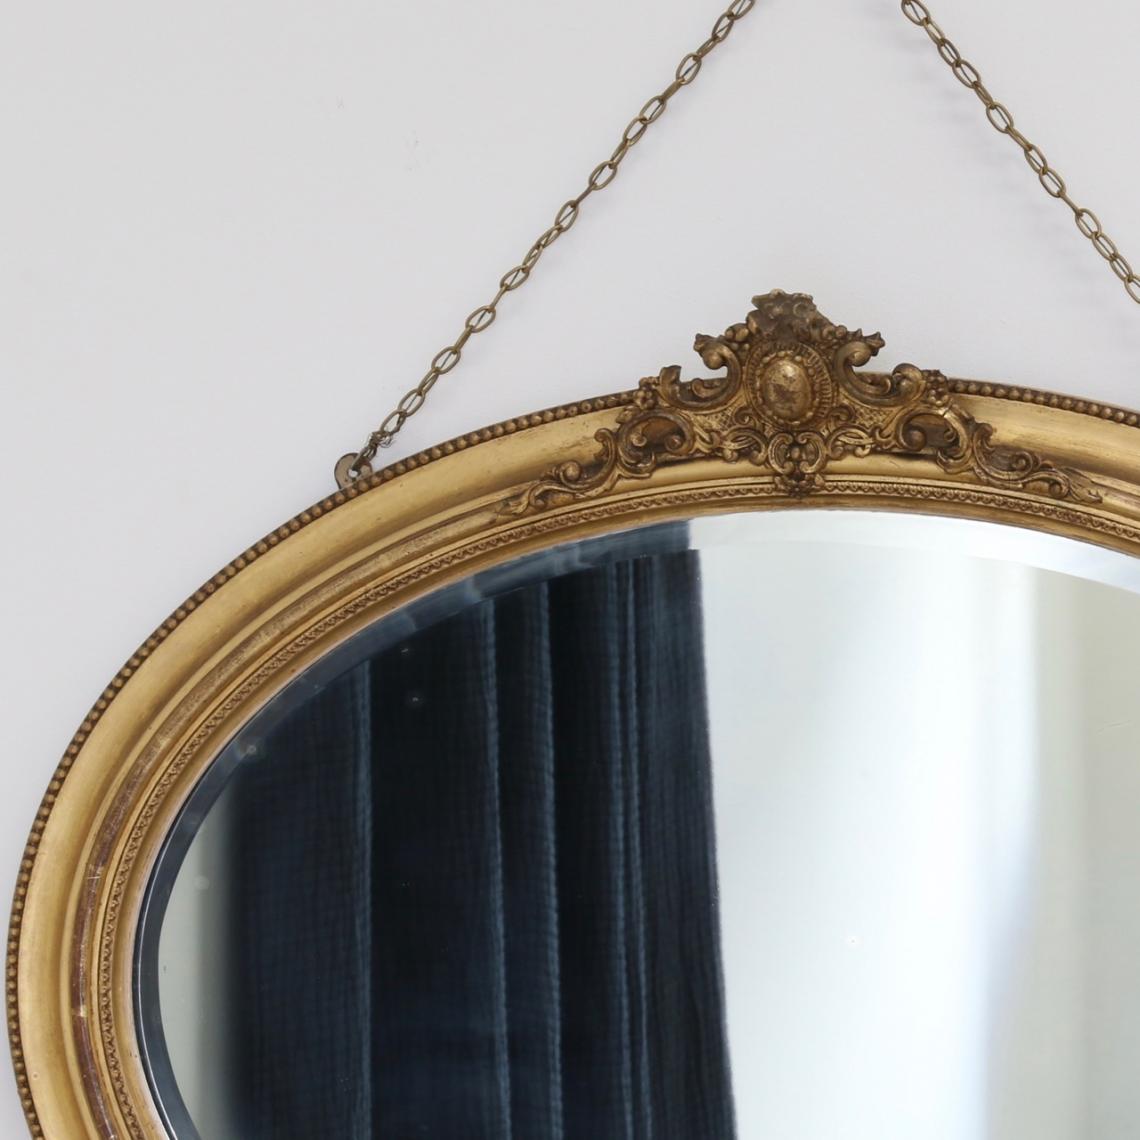 Pair of Oval Mirrors